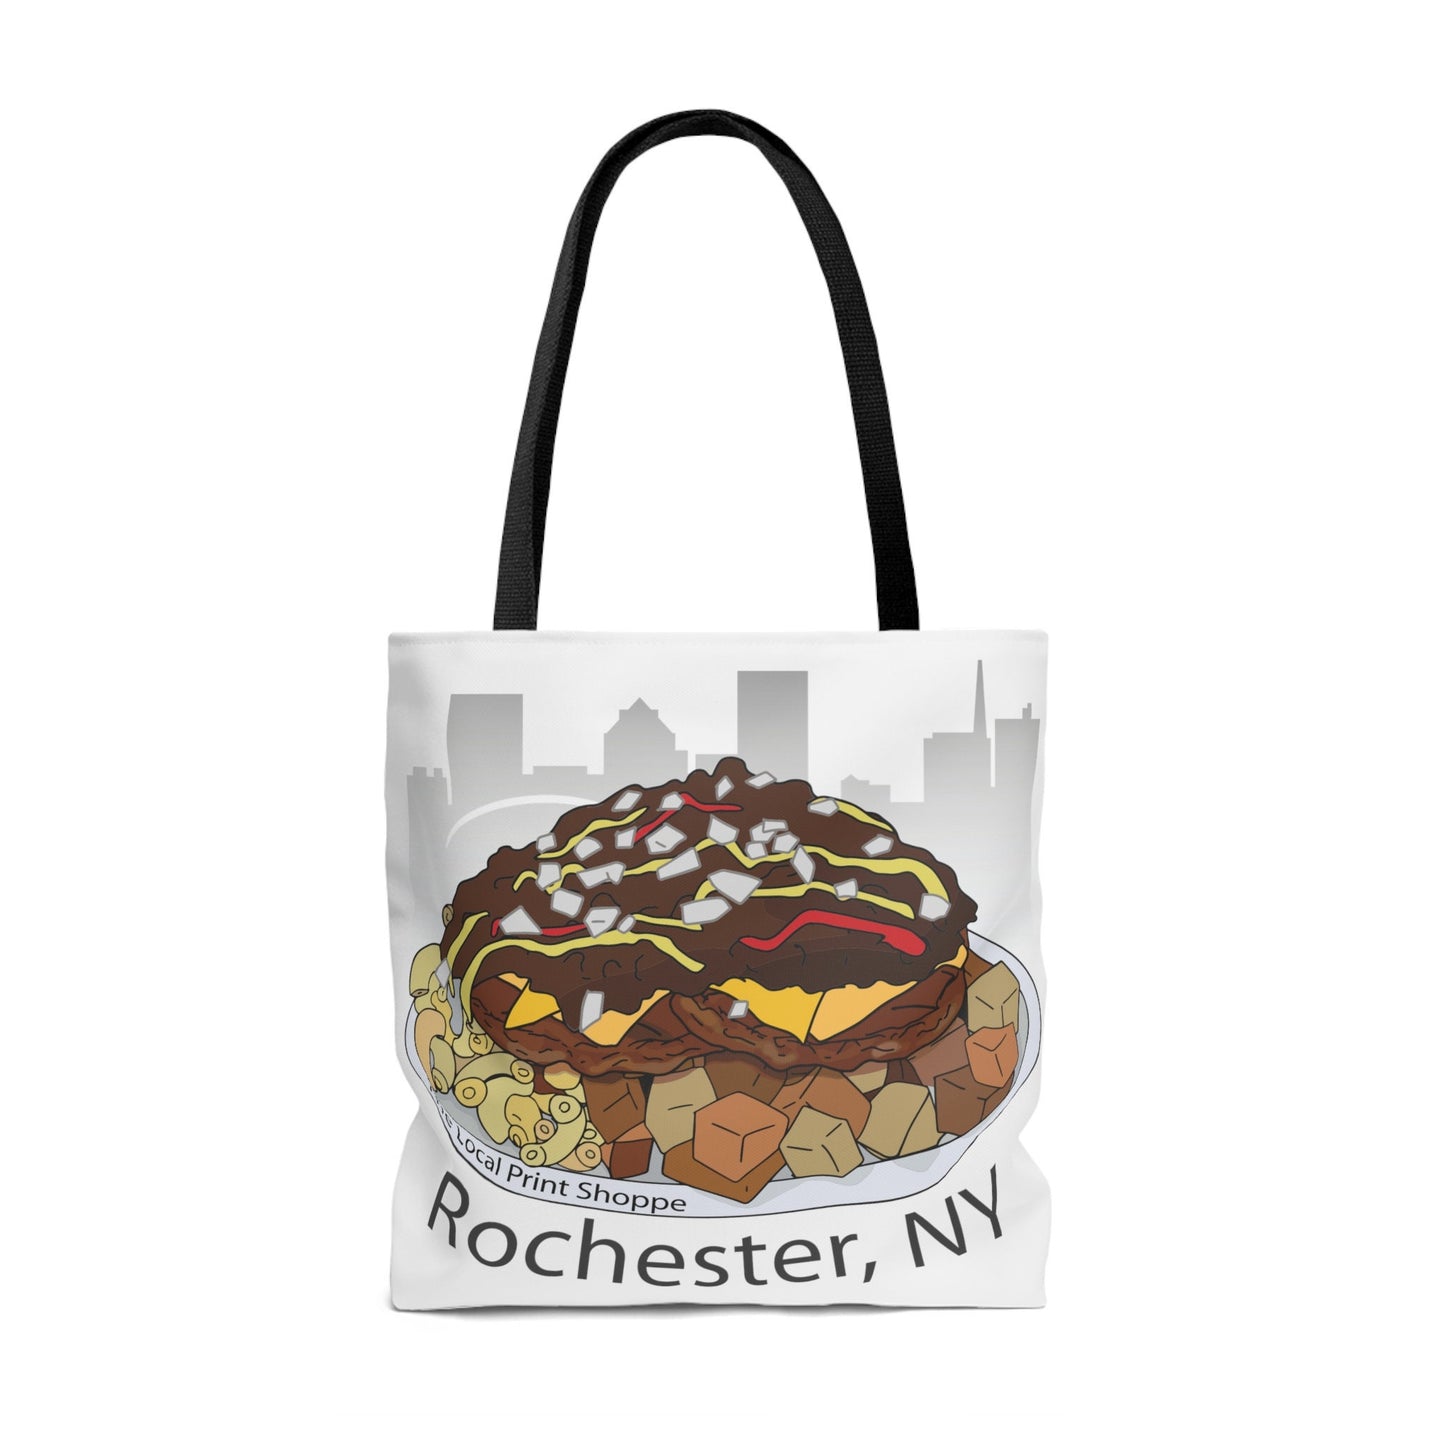 Rochester Garbage Plate Tote Bag - New York's Iconic Trash Plate